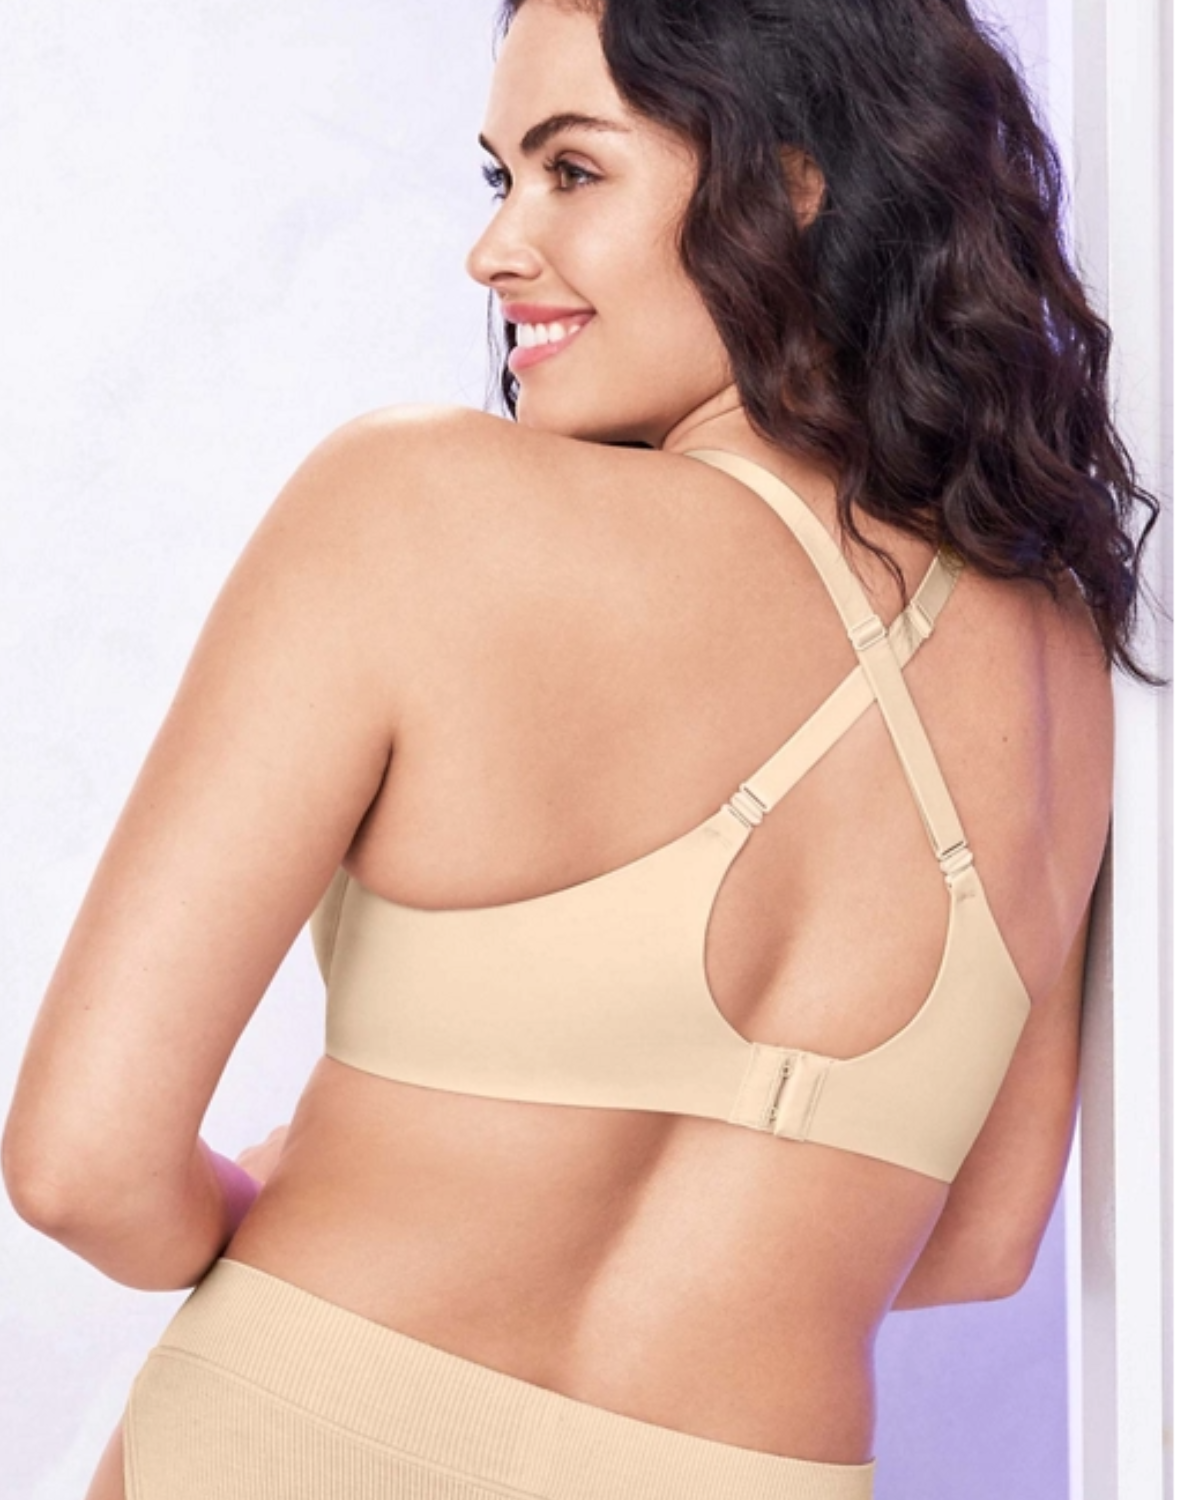 Wacoal Superbly Smooth Underwire Bra (More colors available) - 855342 –  Blum's Swimwear & Intimate Apparel